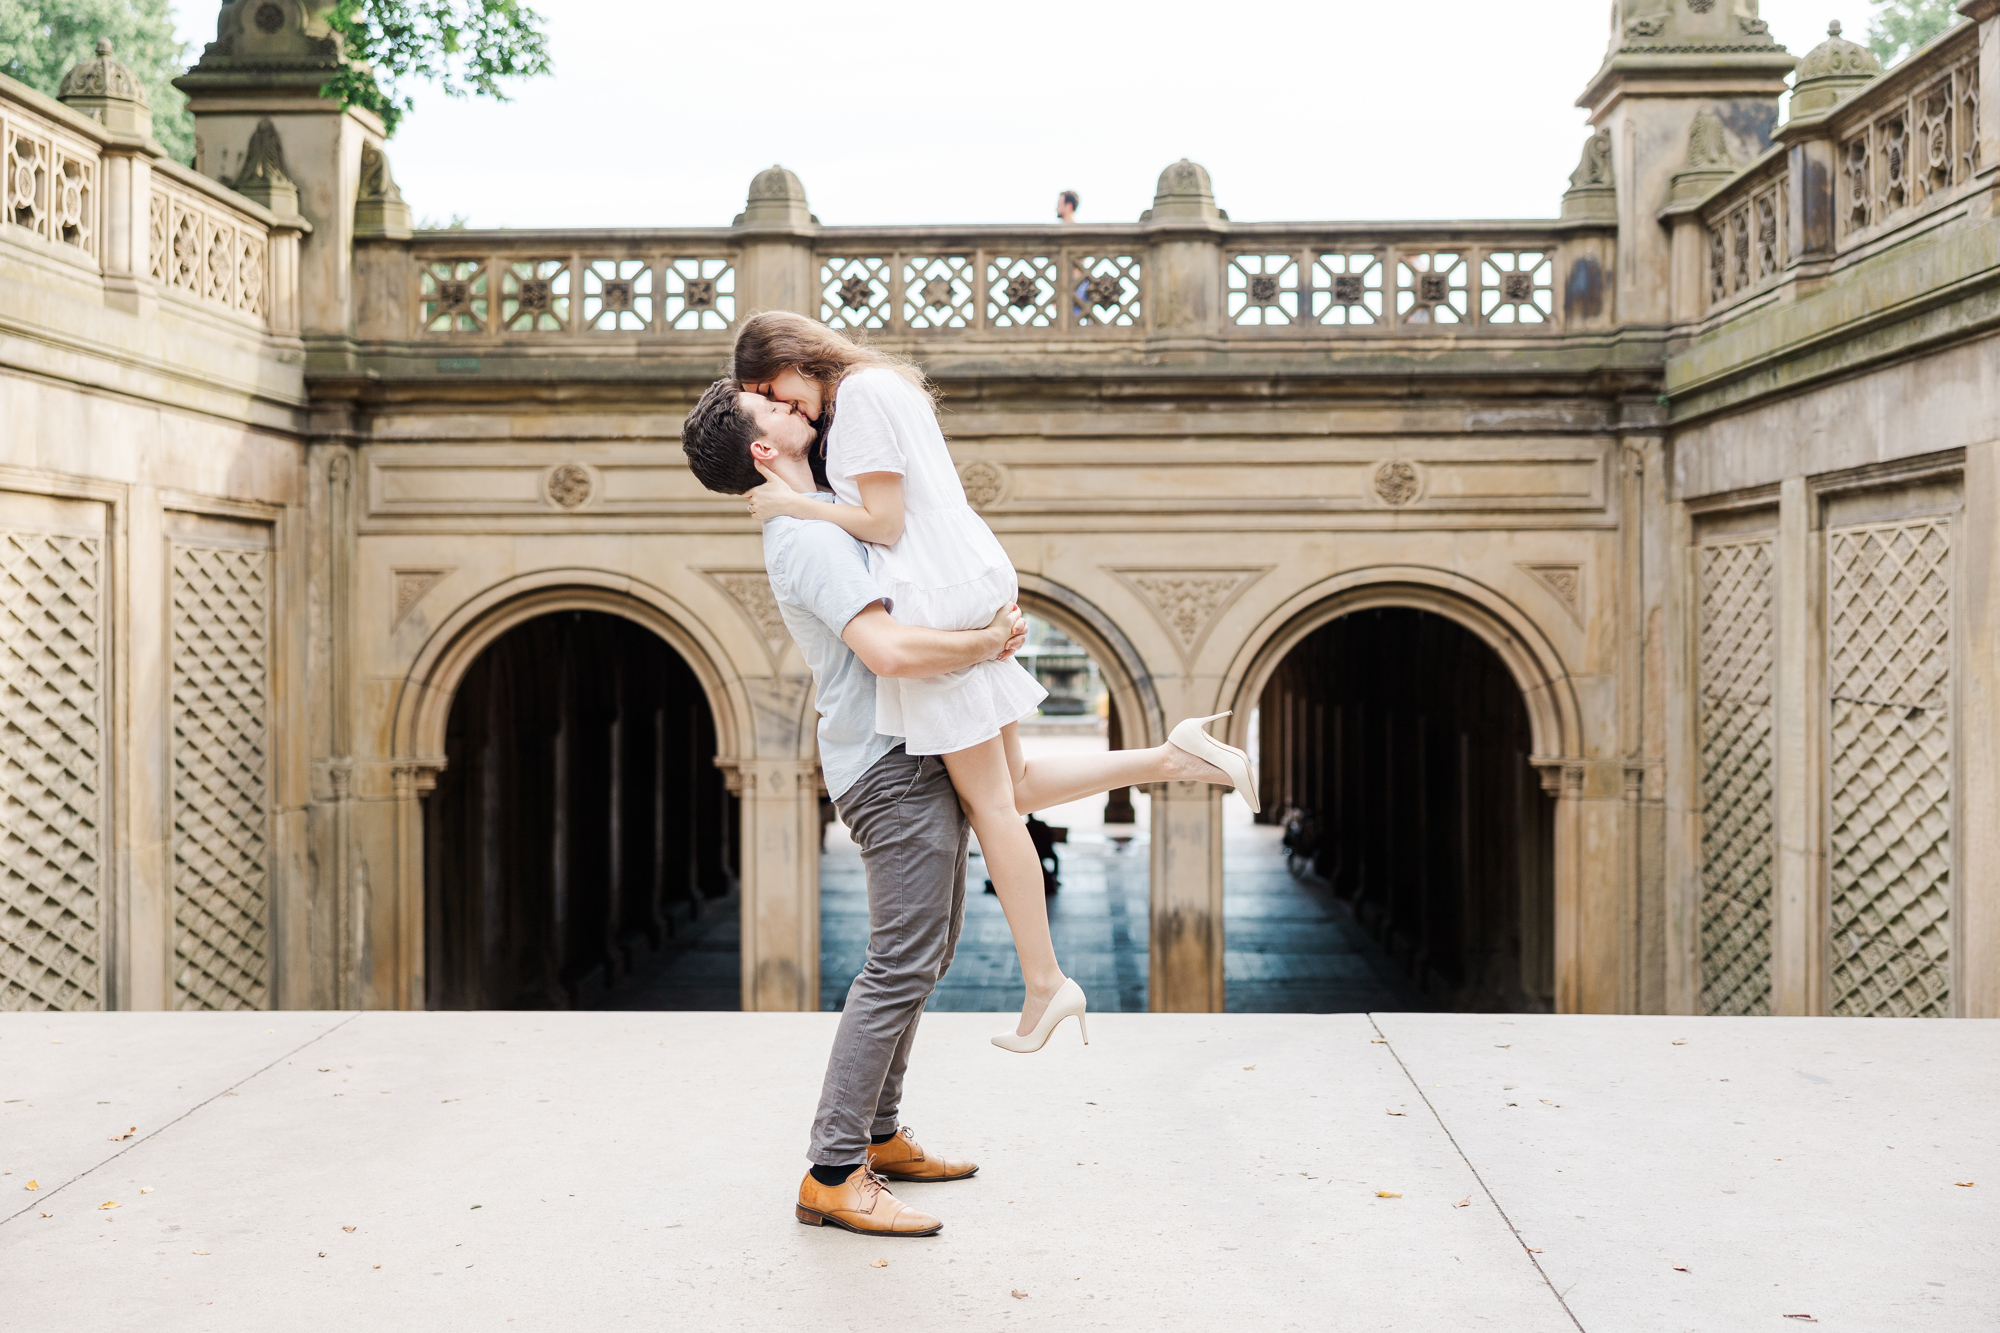 Cheerful Central Park Engagement Photography